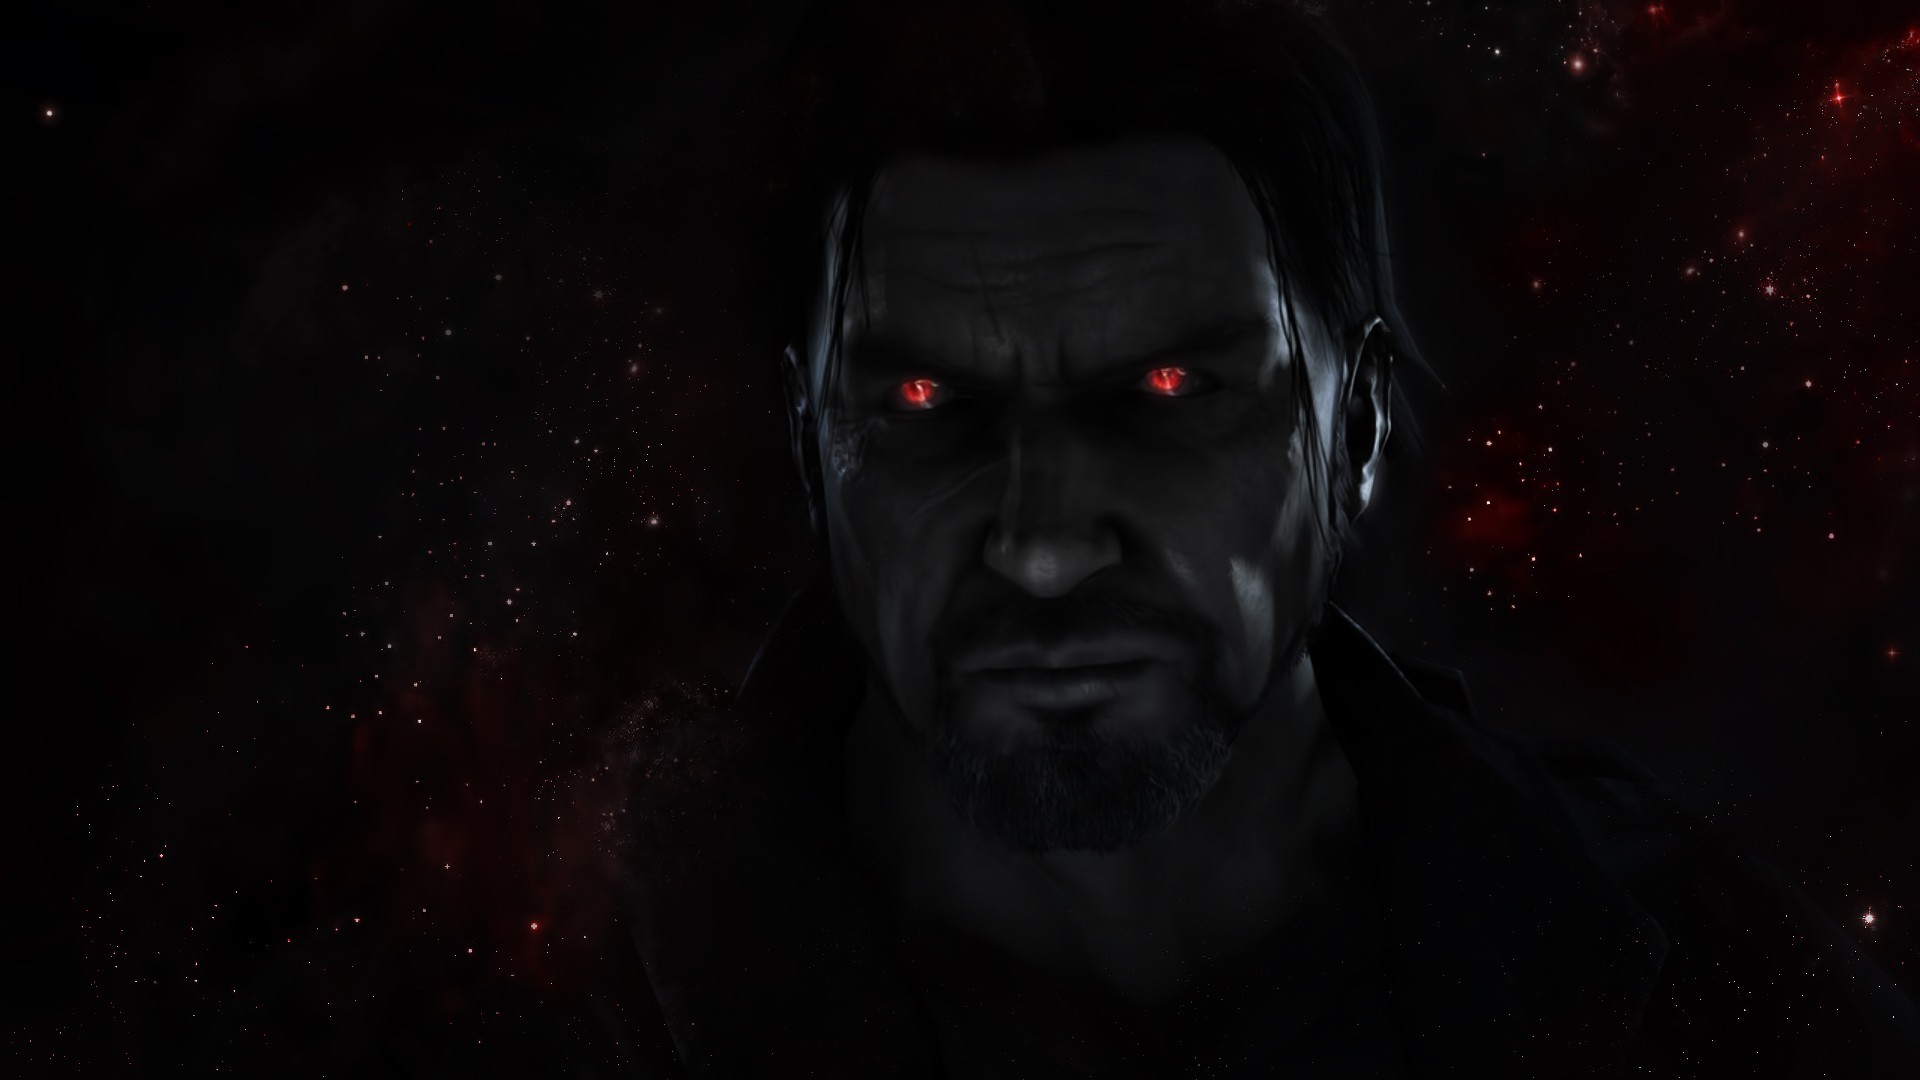 General 1920x1080 Starcraft II James Raynor video games PC gaming red eyes dark Science Fiction Men science fiction